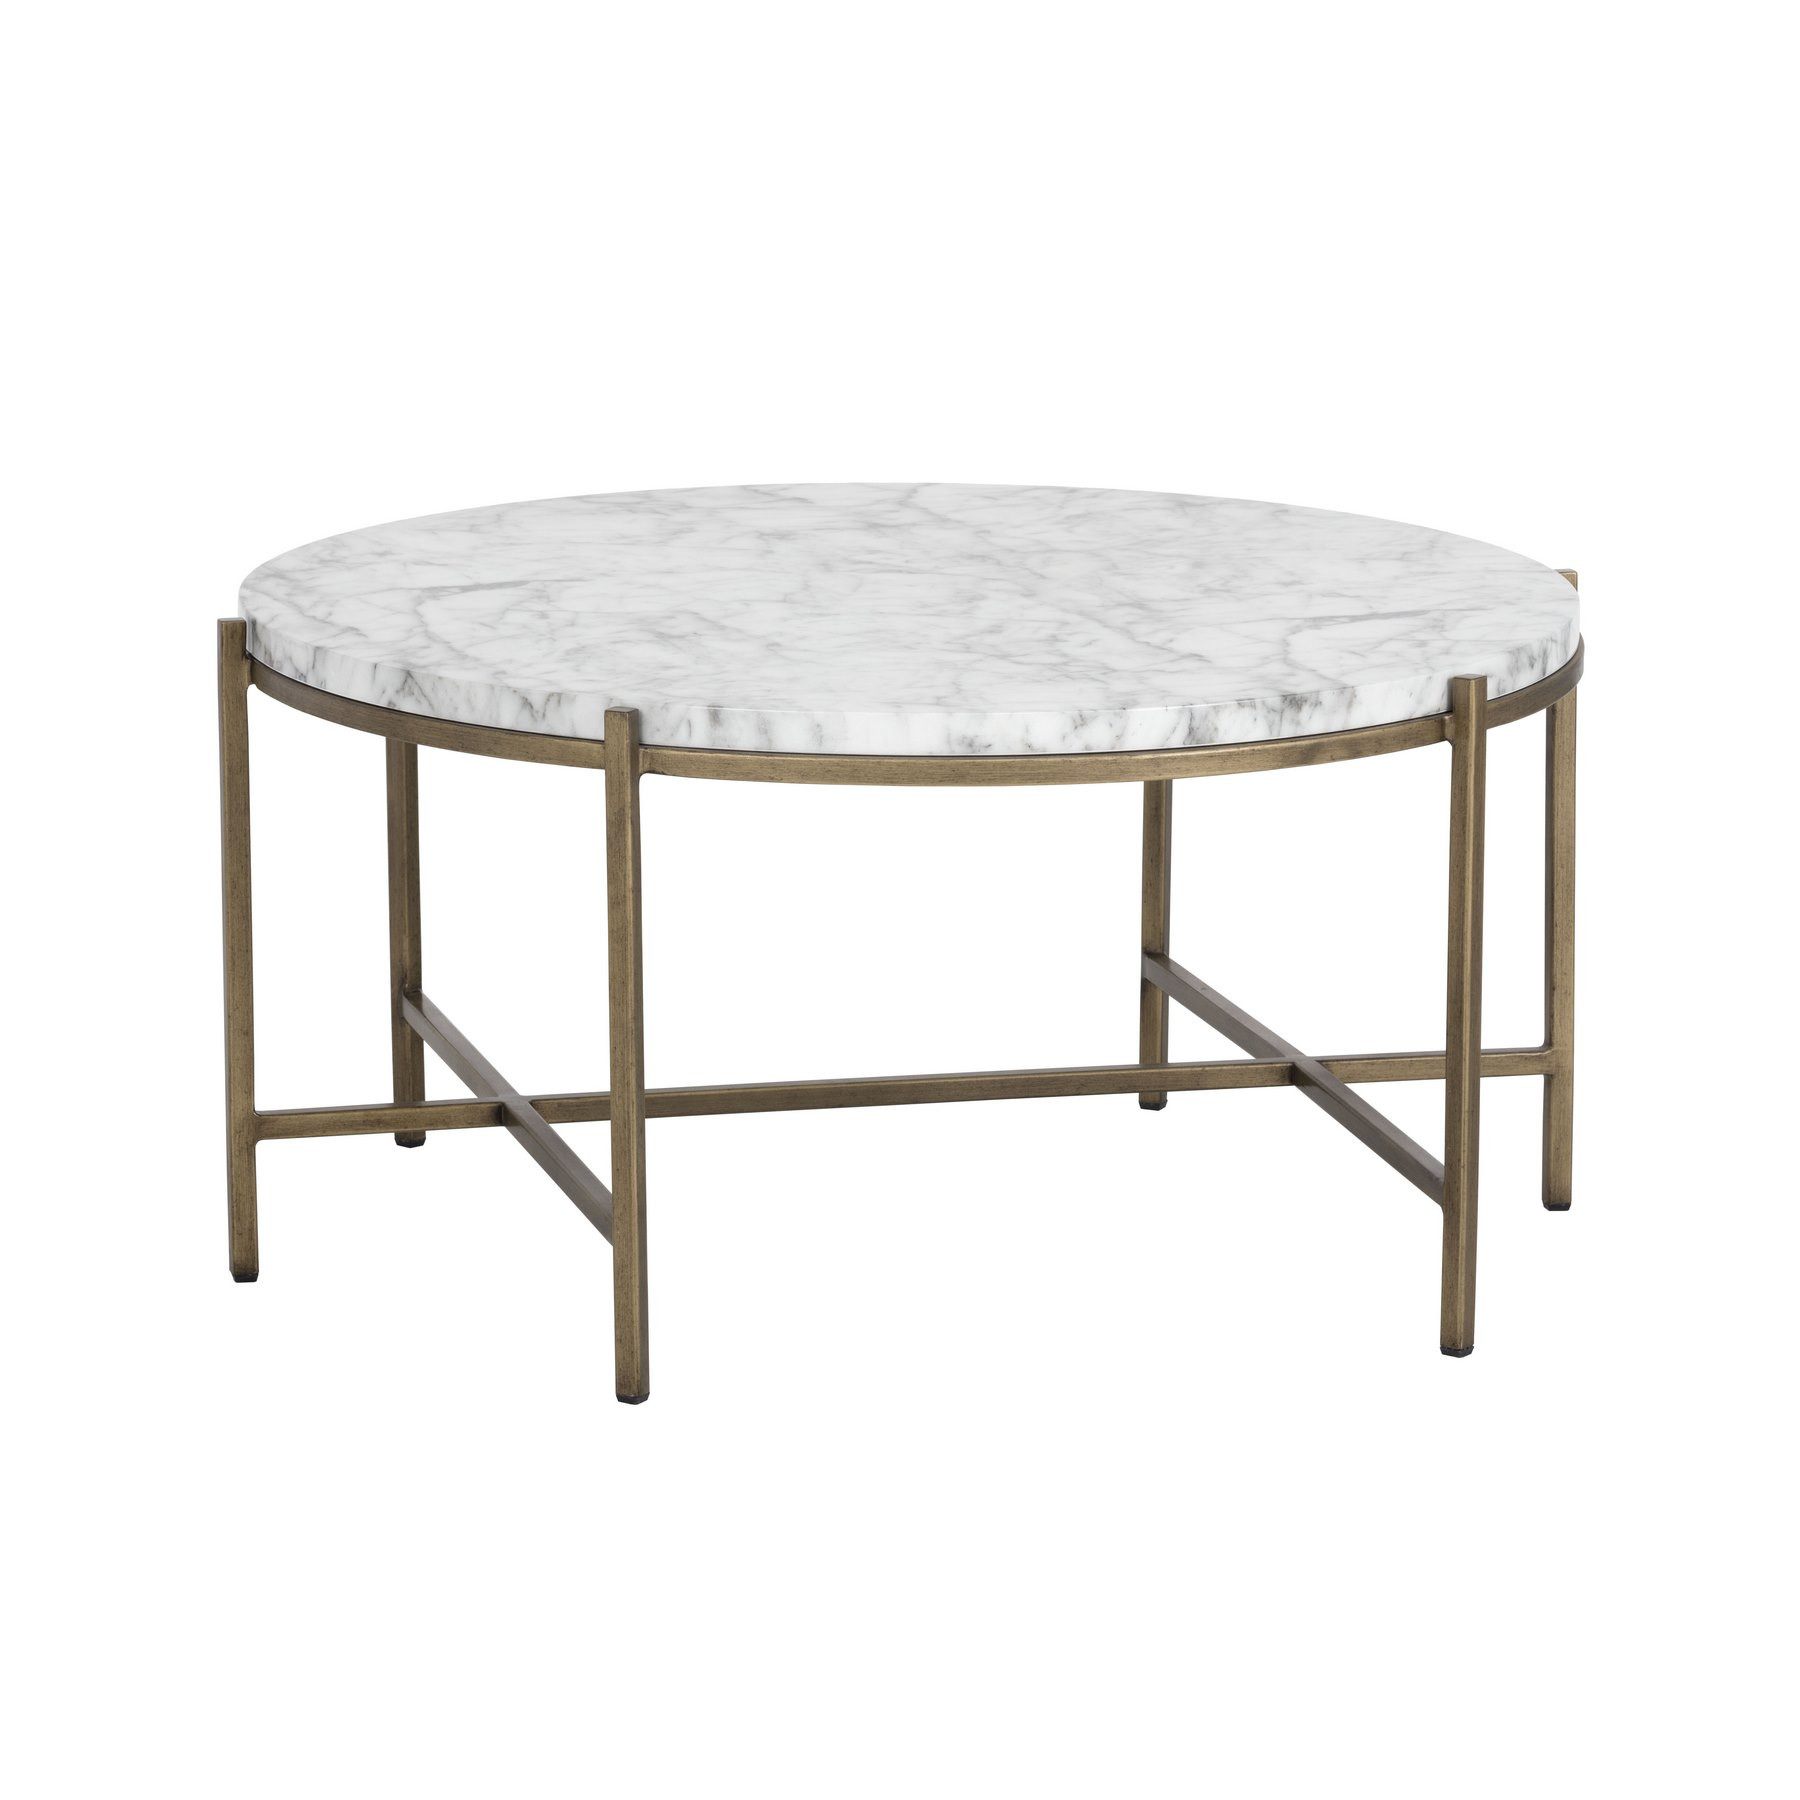 Solana Coffee Table - Round in White by Sunpan